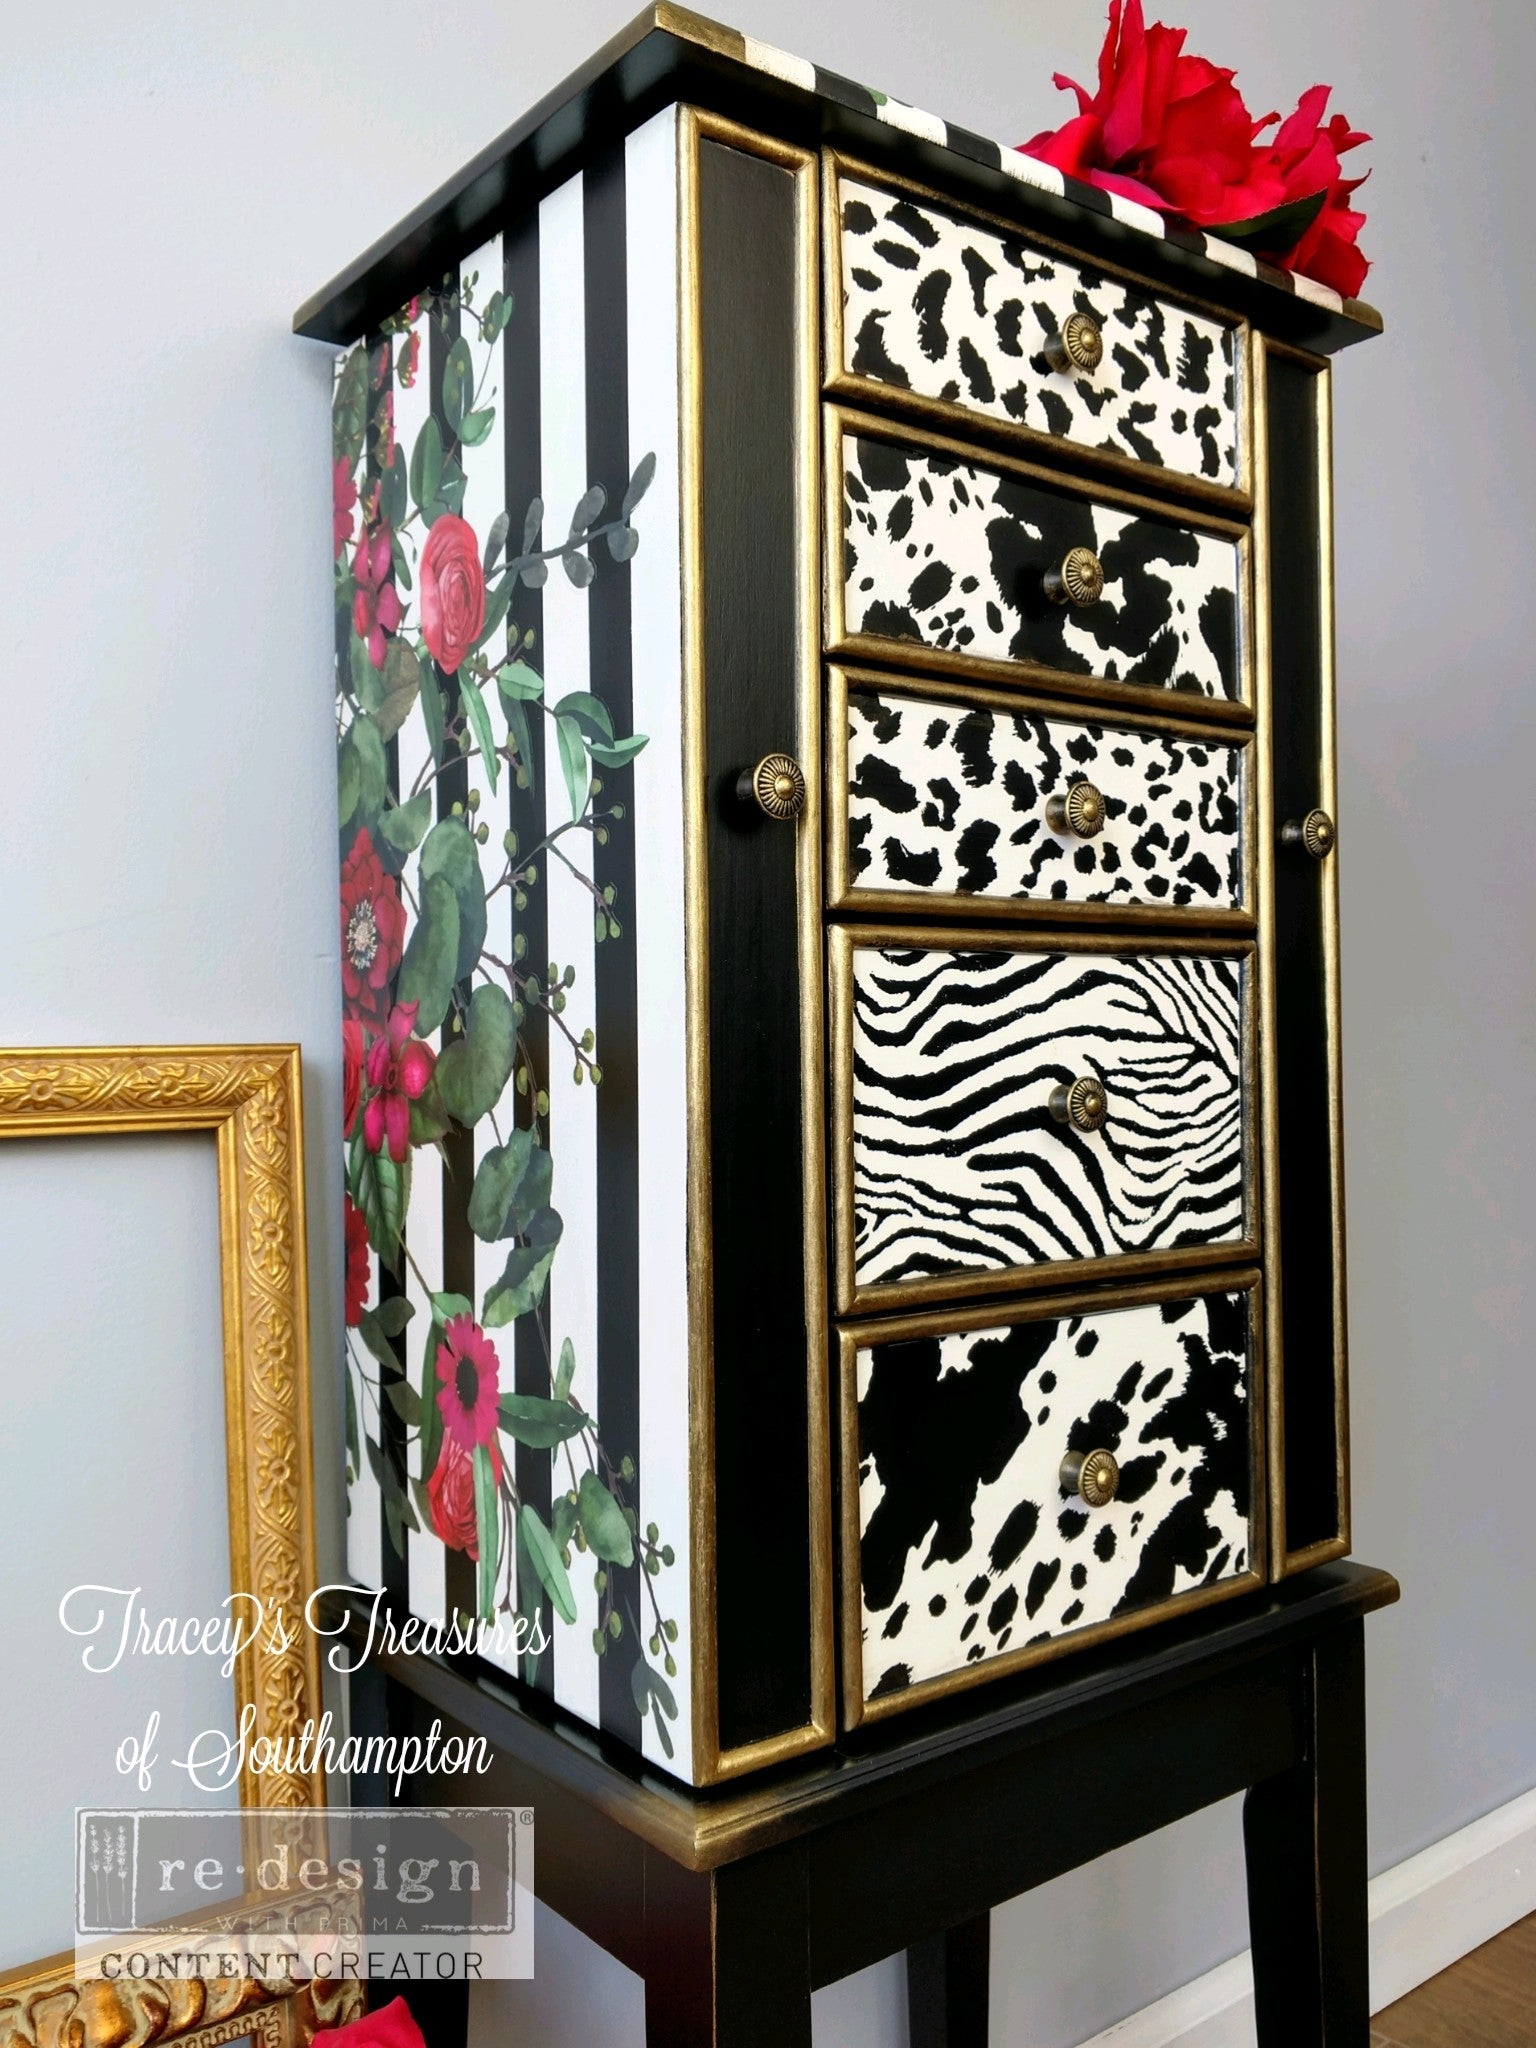 Redesign transfers - Animal Patterns - Nordic Chic®